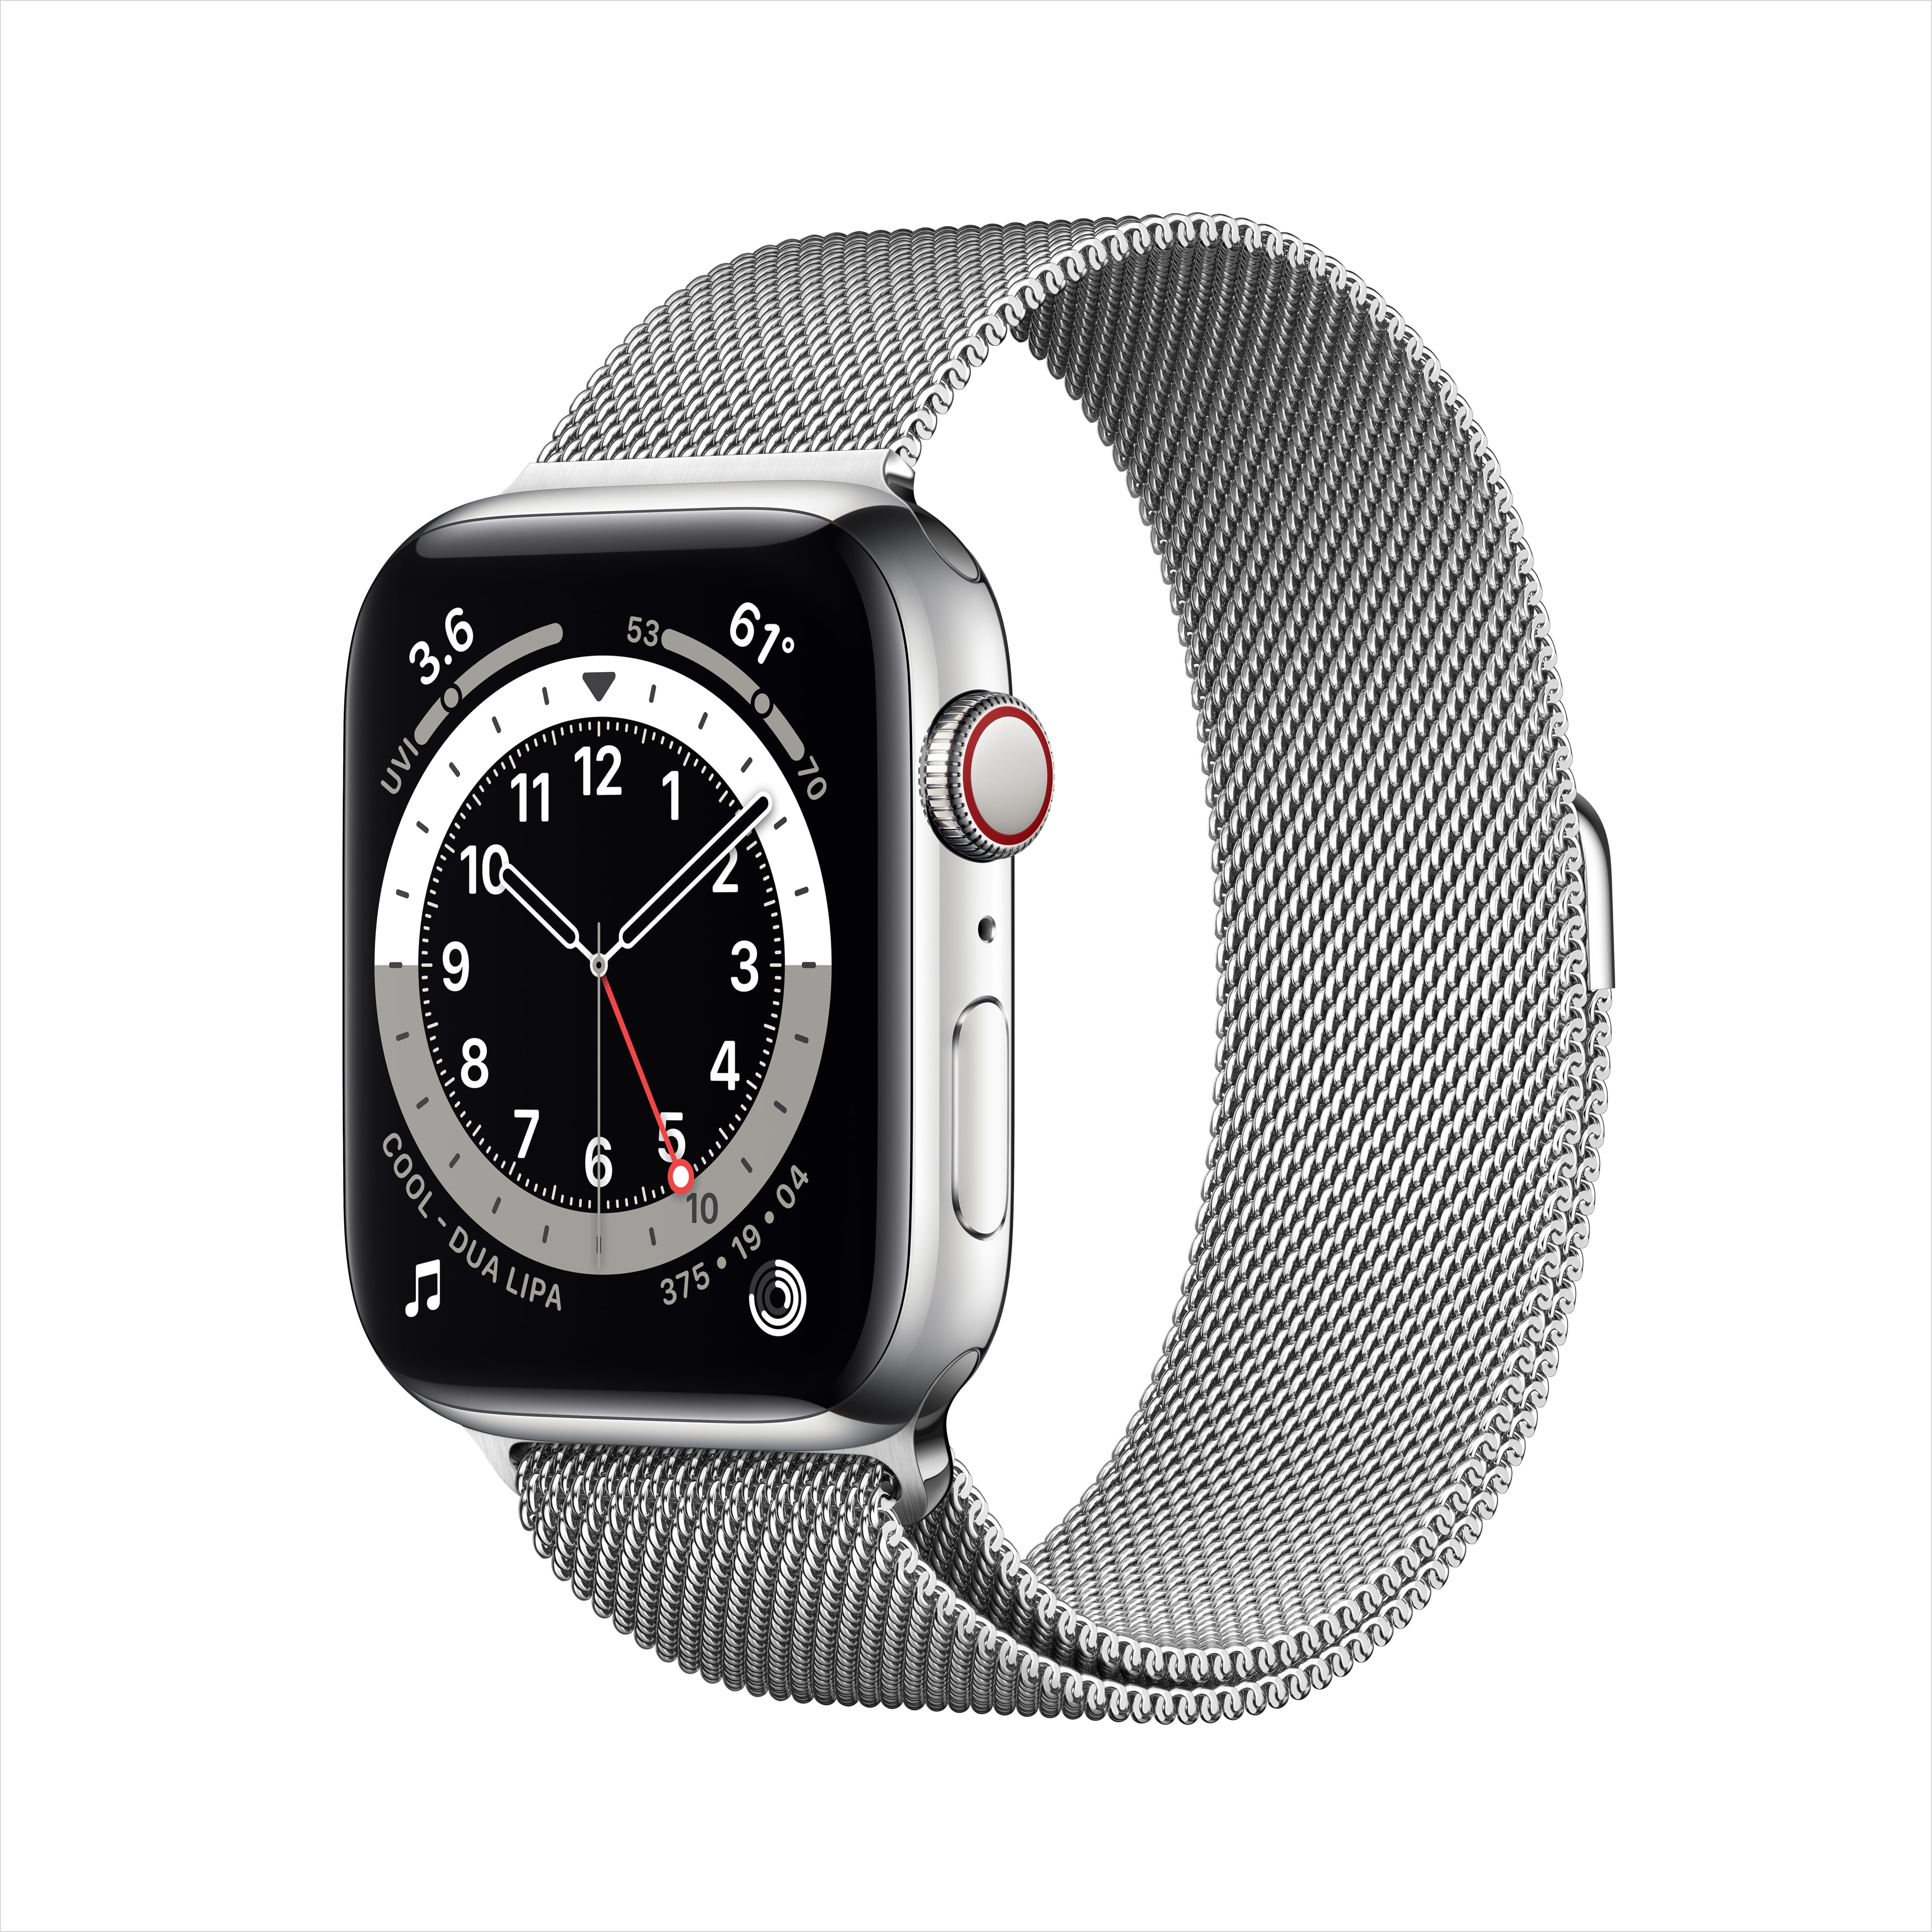 Apple Watch Series 6 GPS + Cellular, 44mm Silver Stainless Steel Case Stainless Steel Case Apple Watch